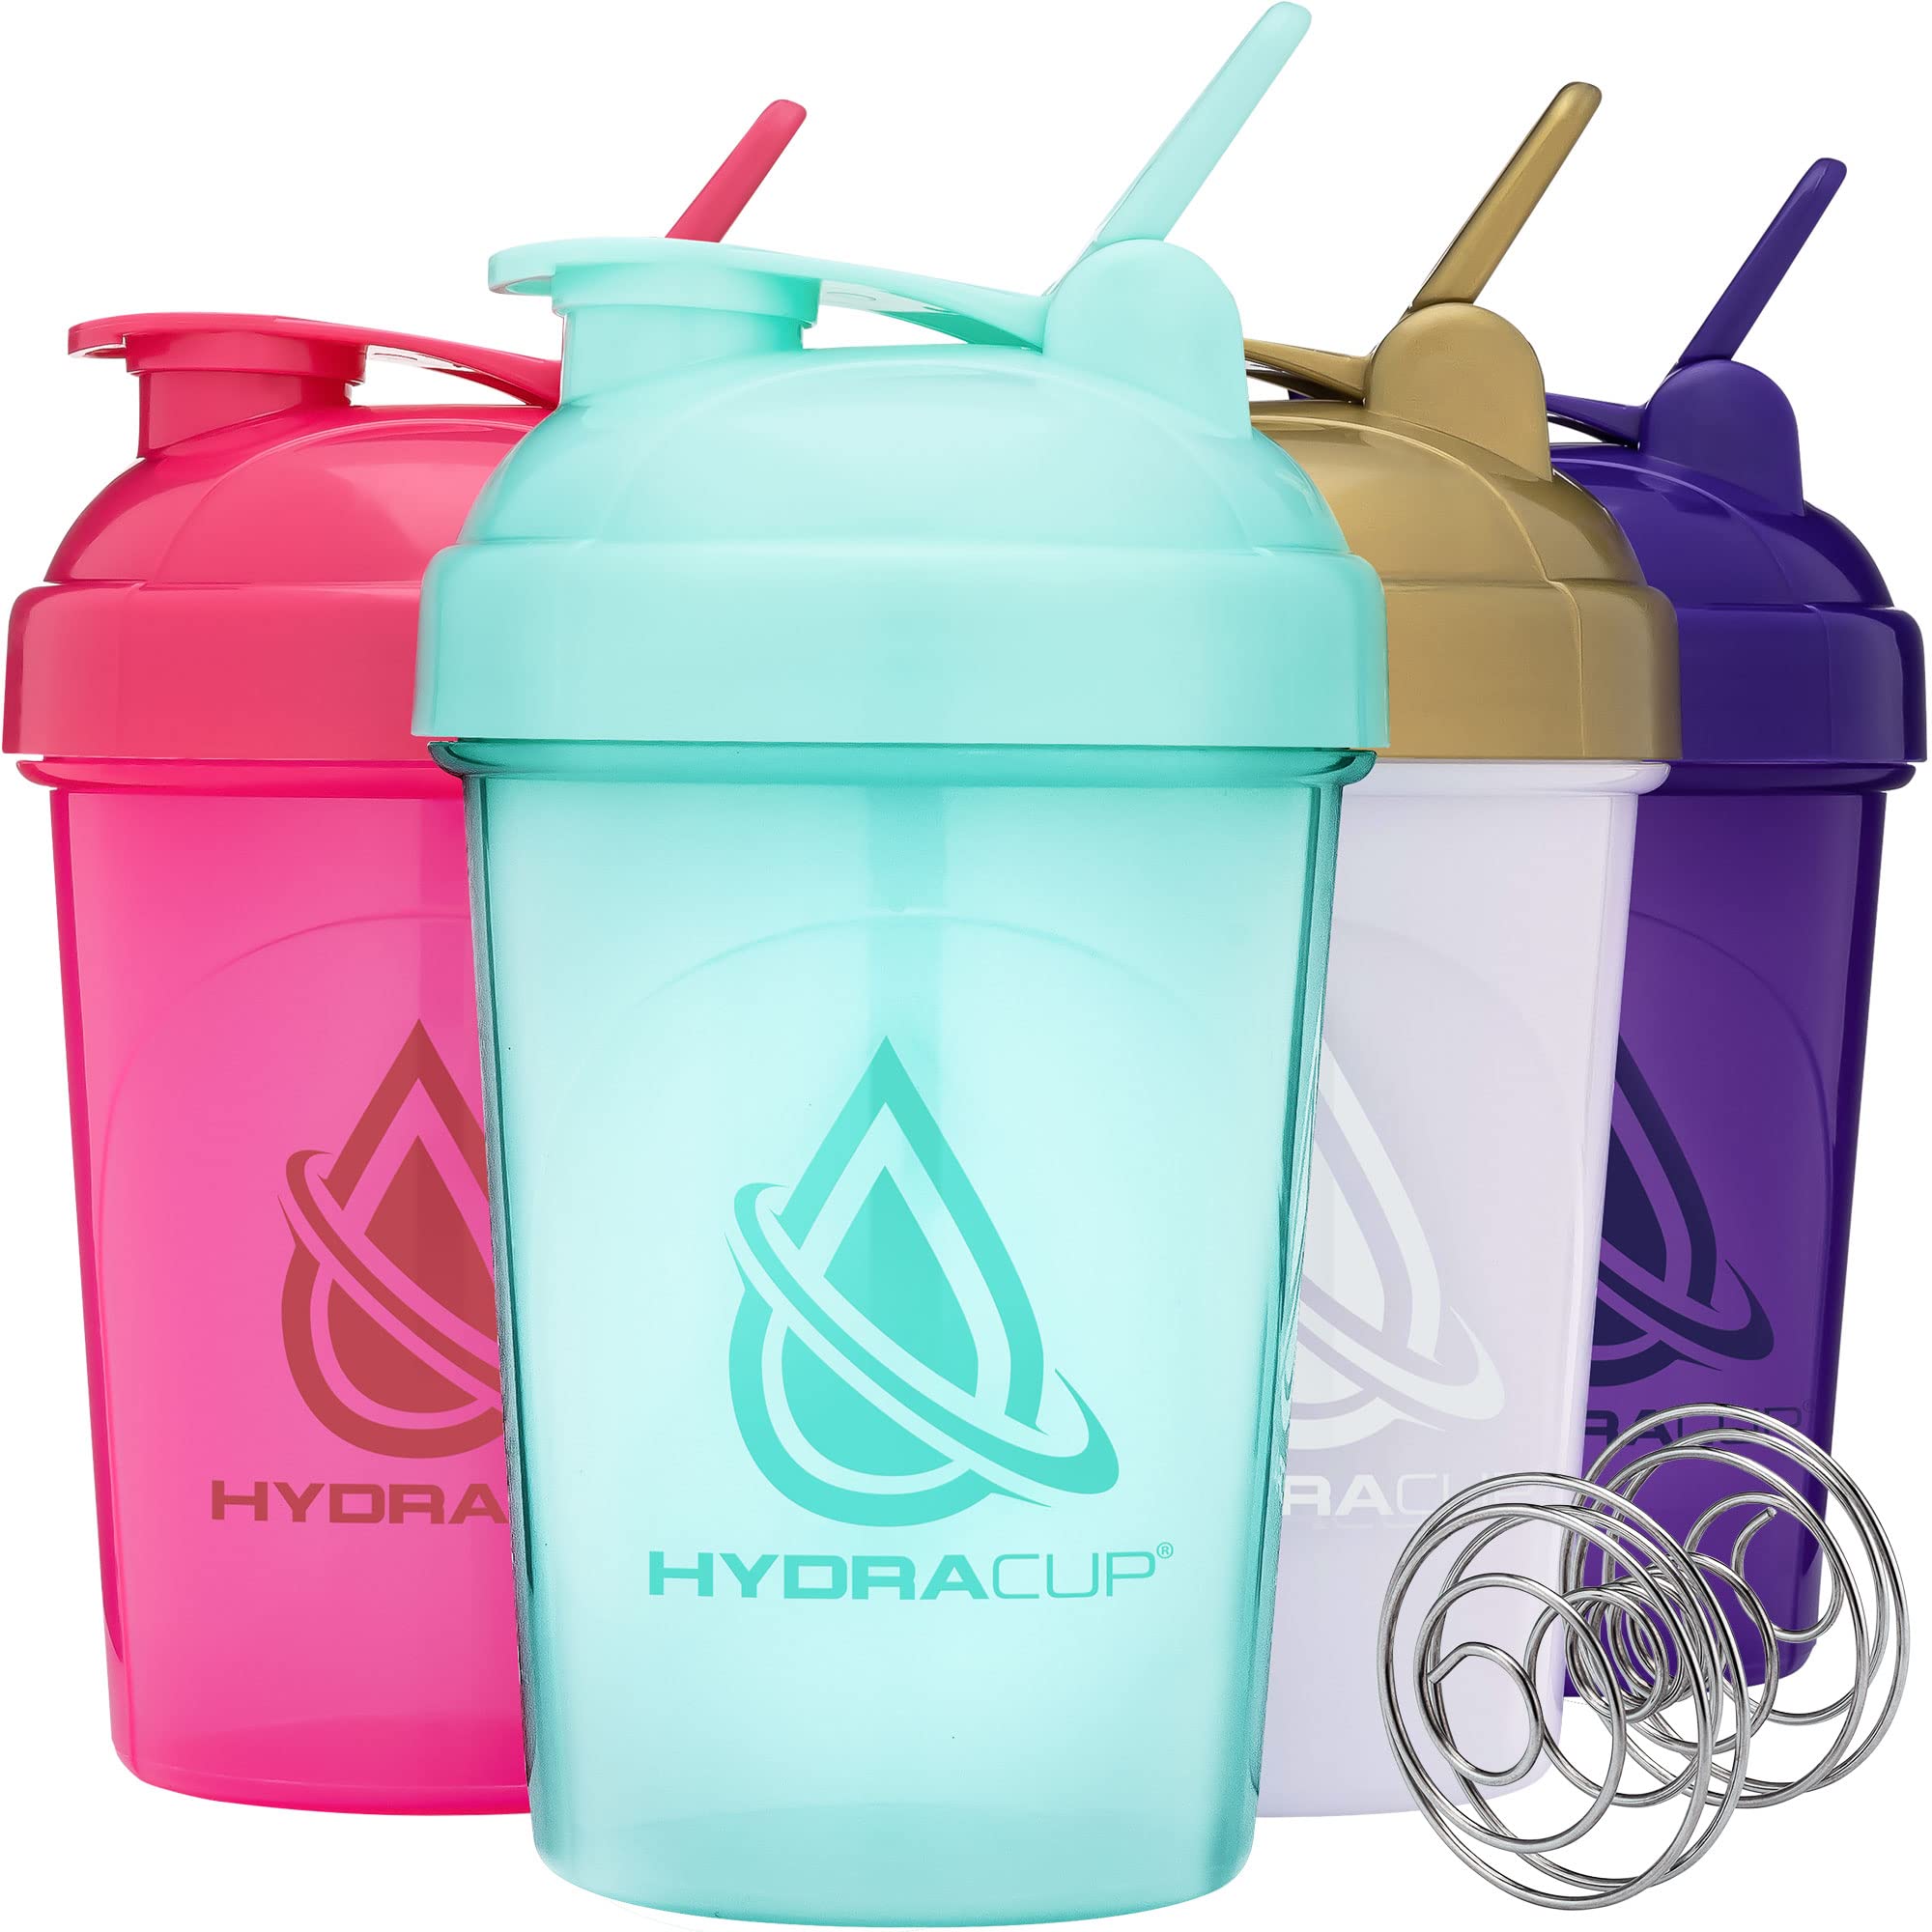 Hydra Cup 4 PACK - 20-Ounce Shaker Bottle with Barbell Blender Wire Whisk, Shaker Cups for Protein Mixes